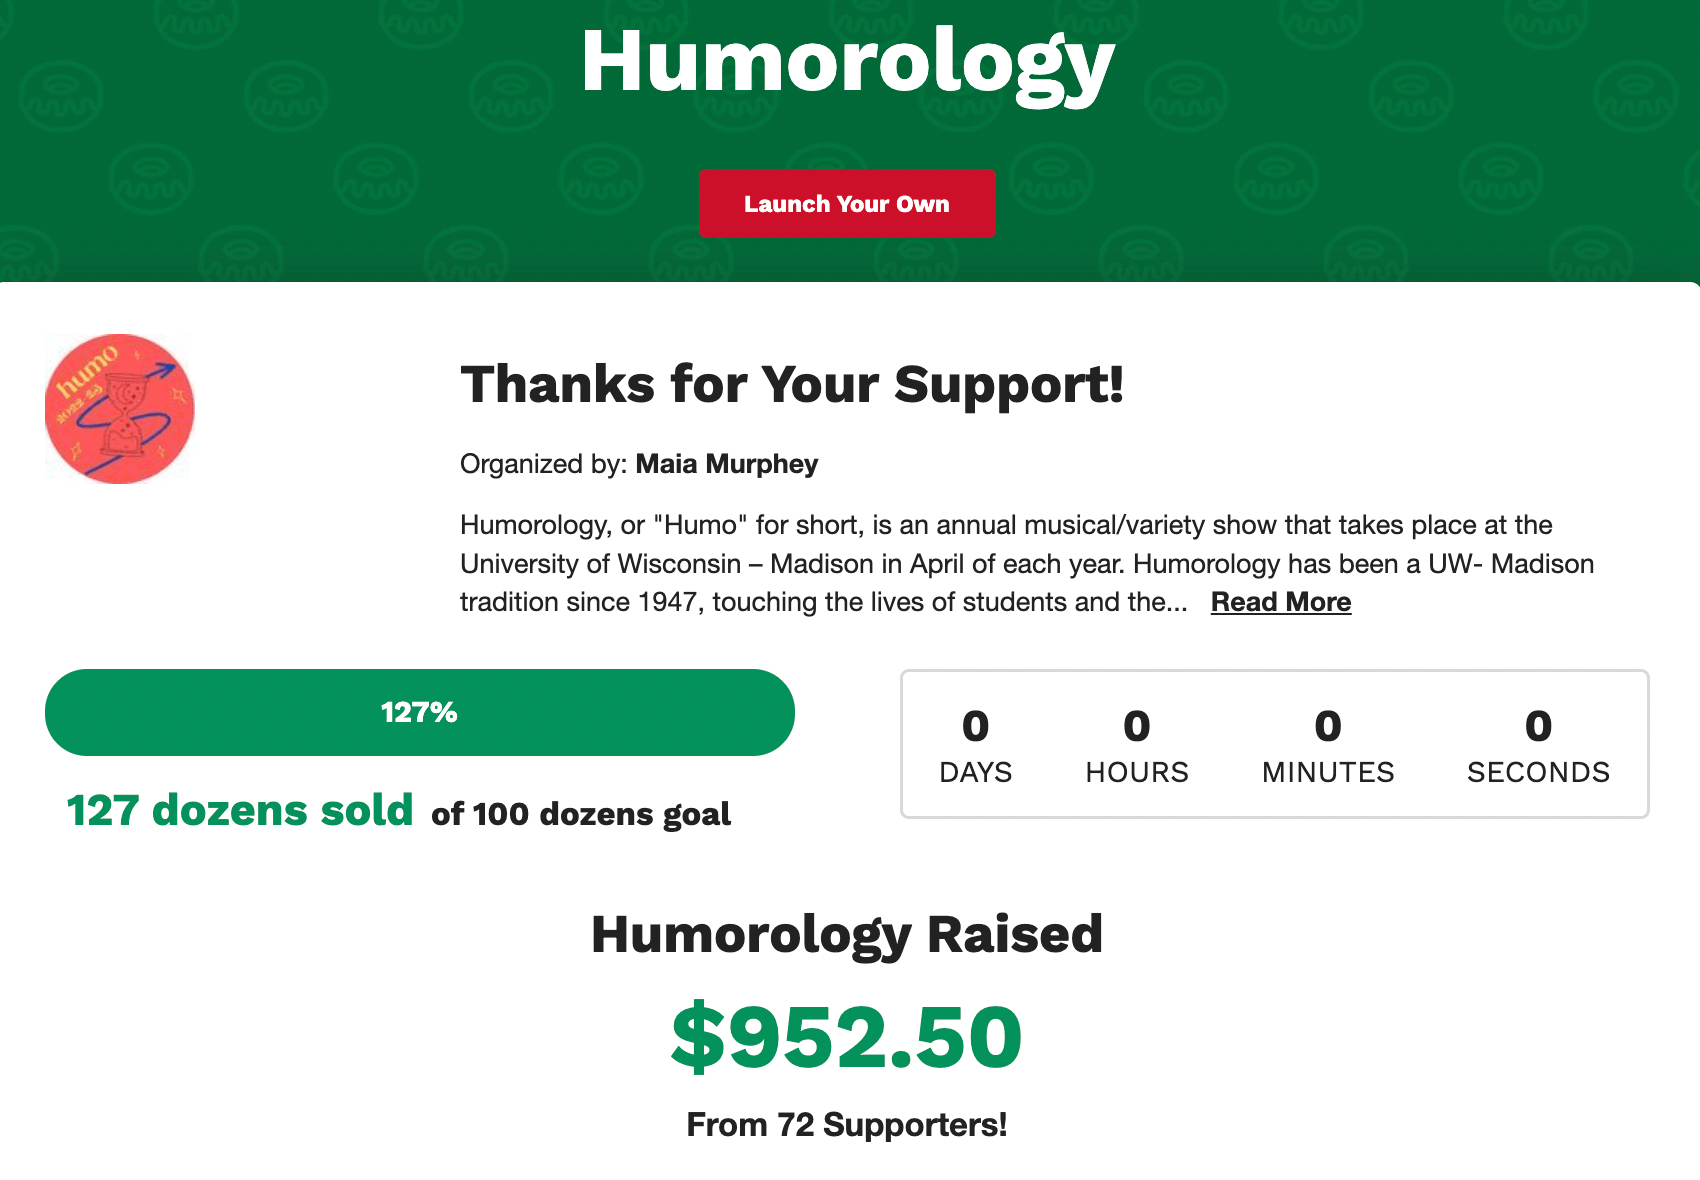 Humorology's Digital Dozens Fundraising Campaign Page